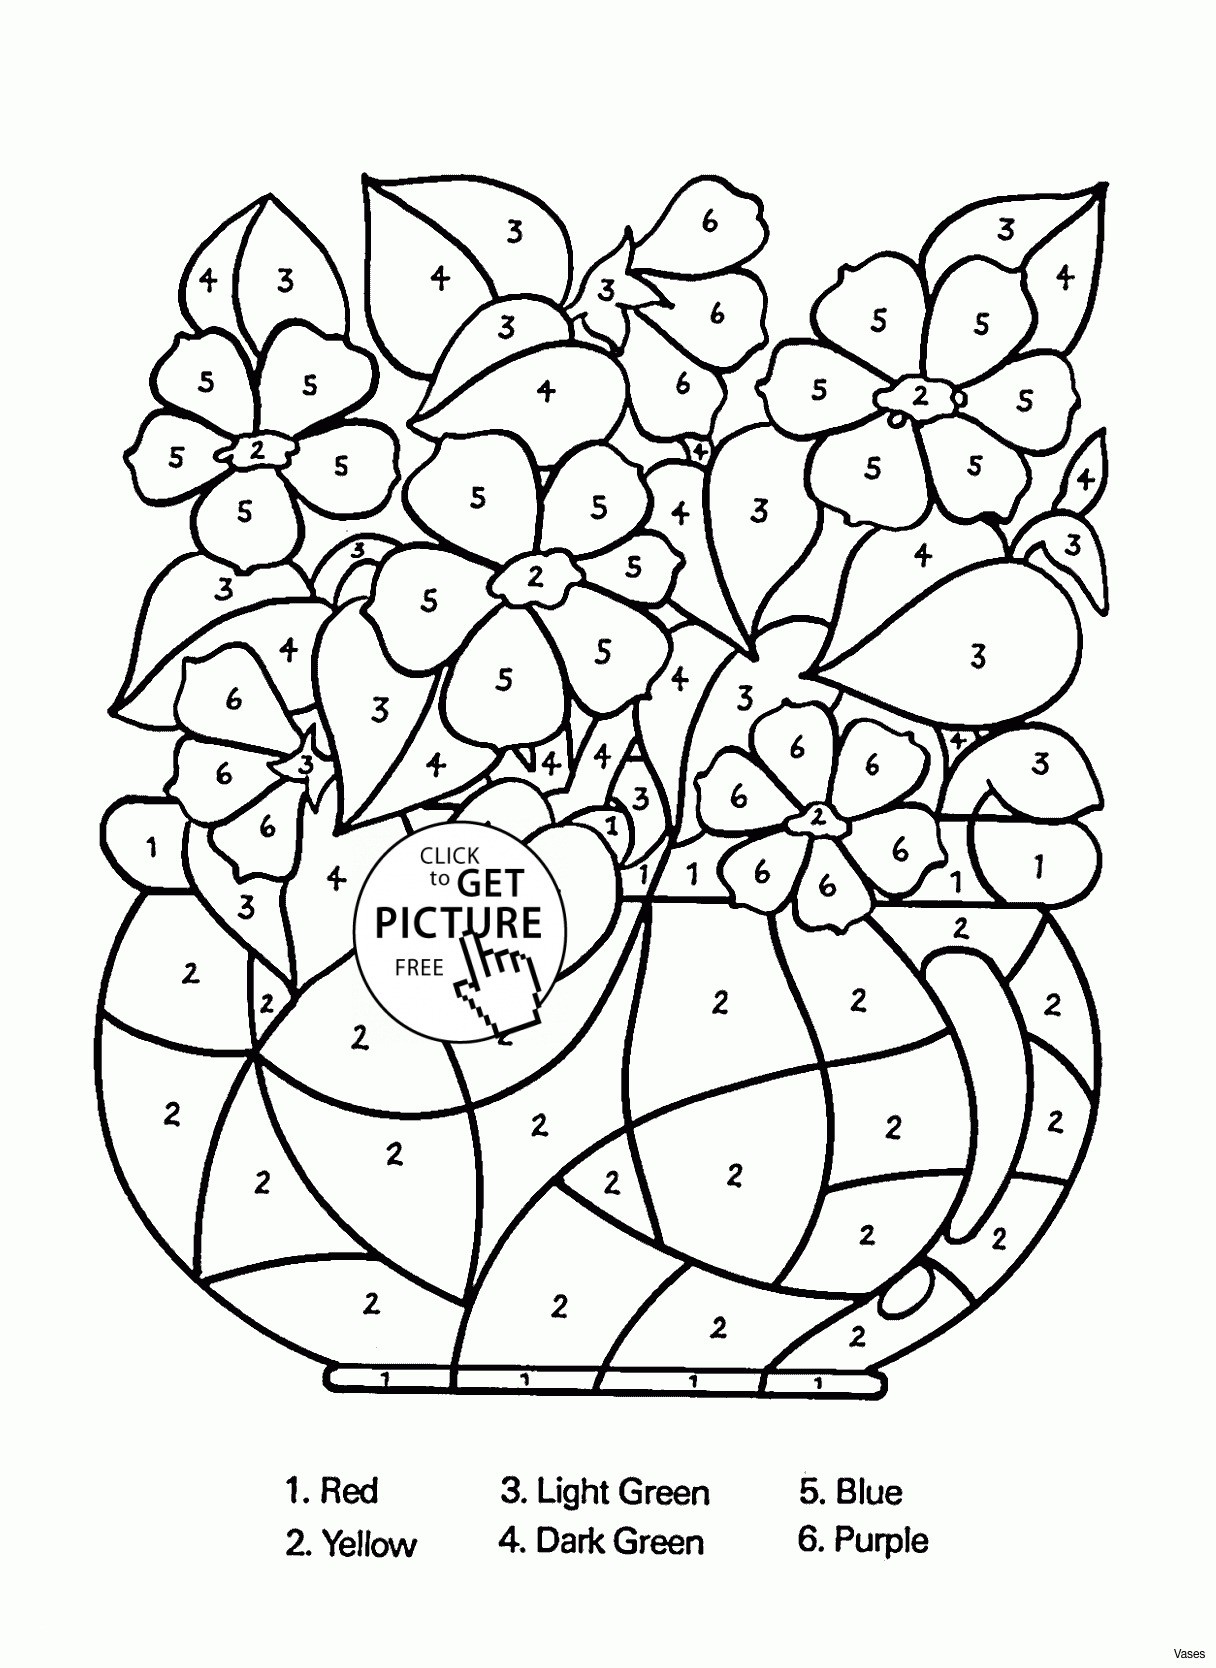 Children's Turkey Coloring Pages Wallpaper